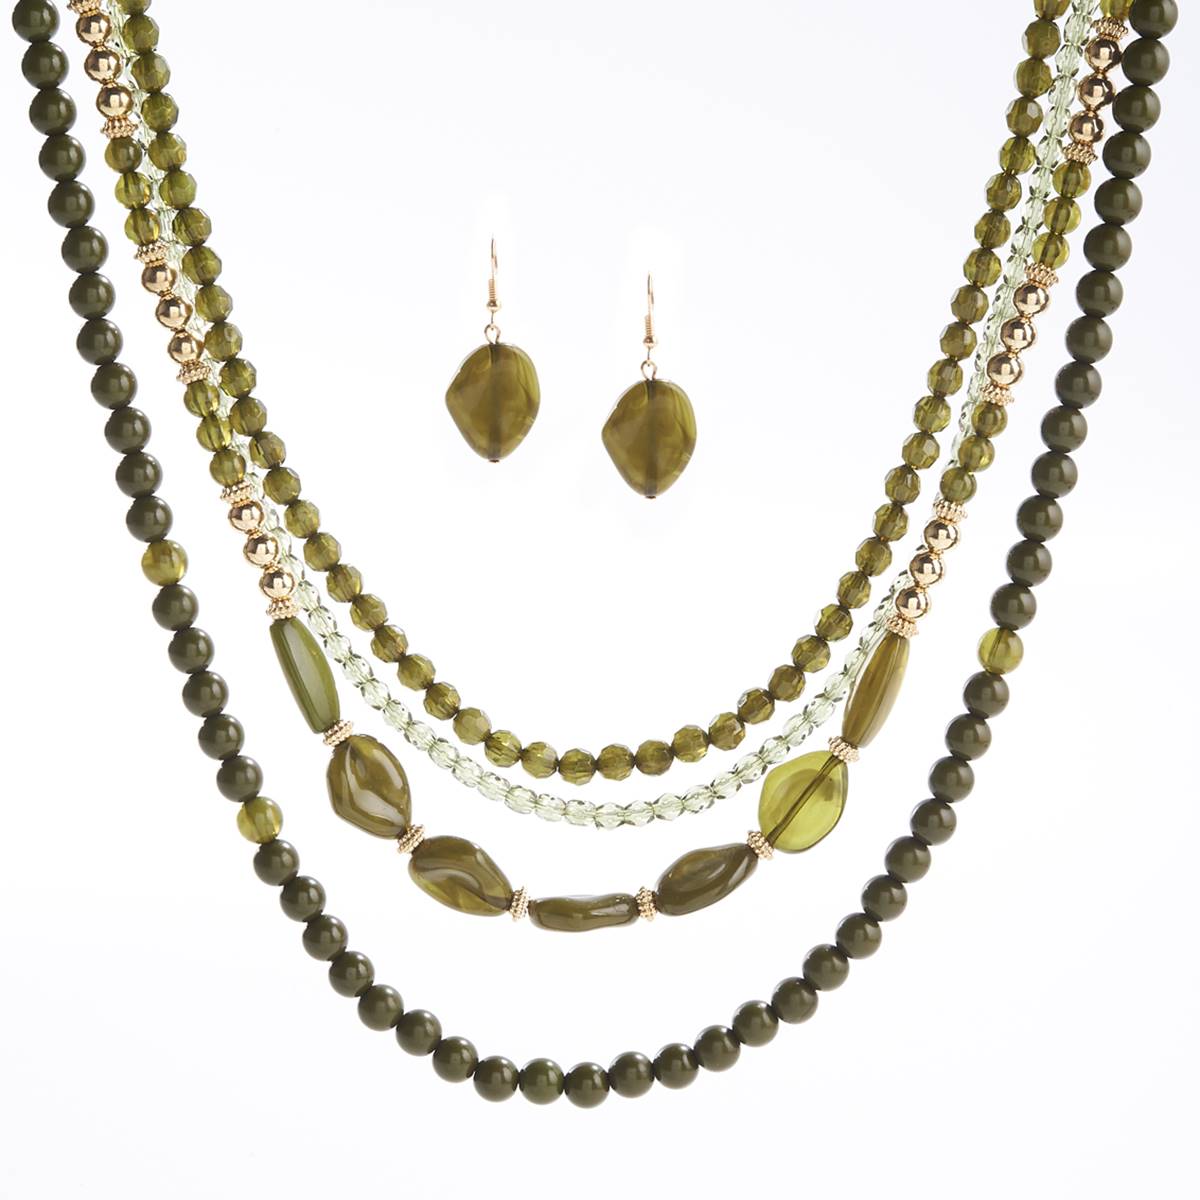 Ashley Cooper(tm) 4-Row Olive Beaded Necklace & Earrings Set